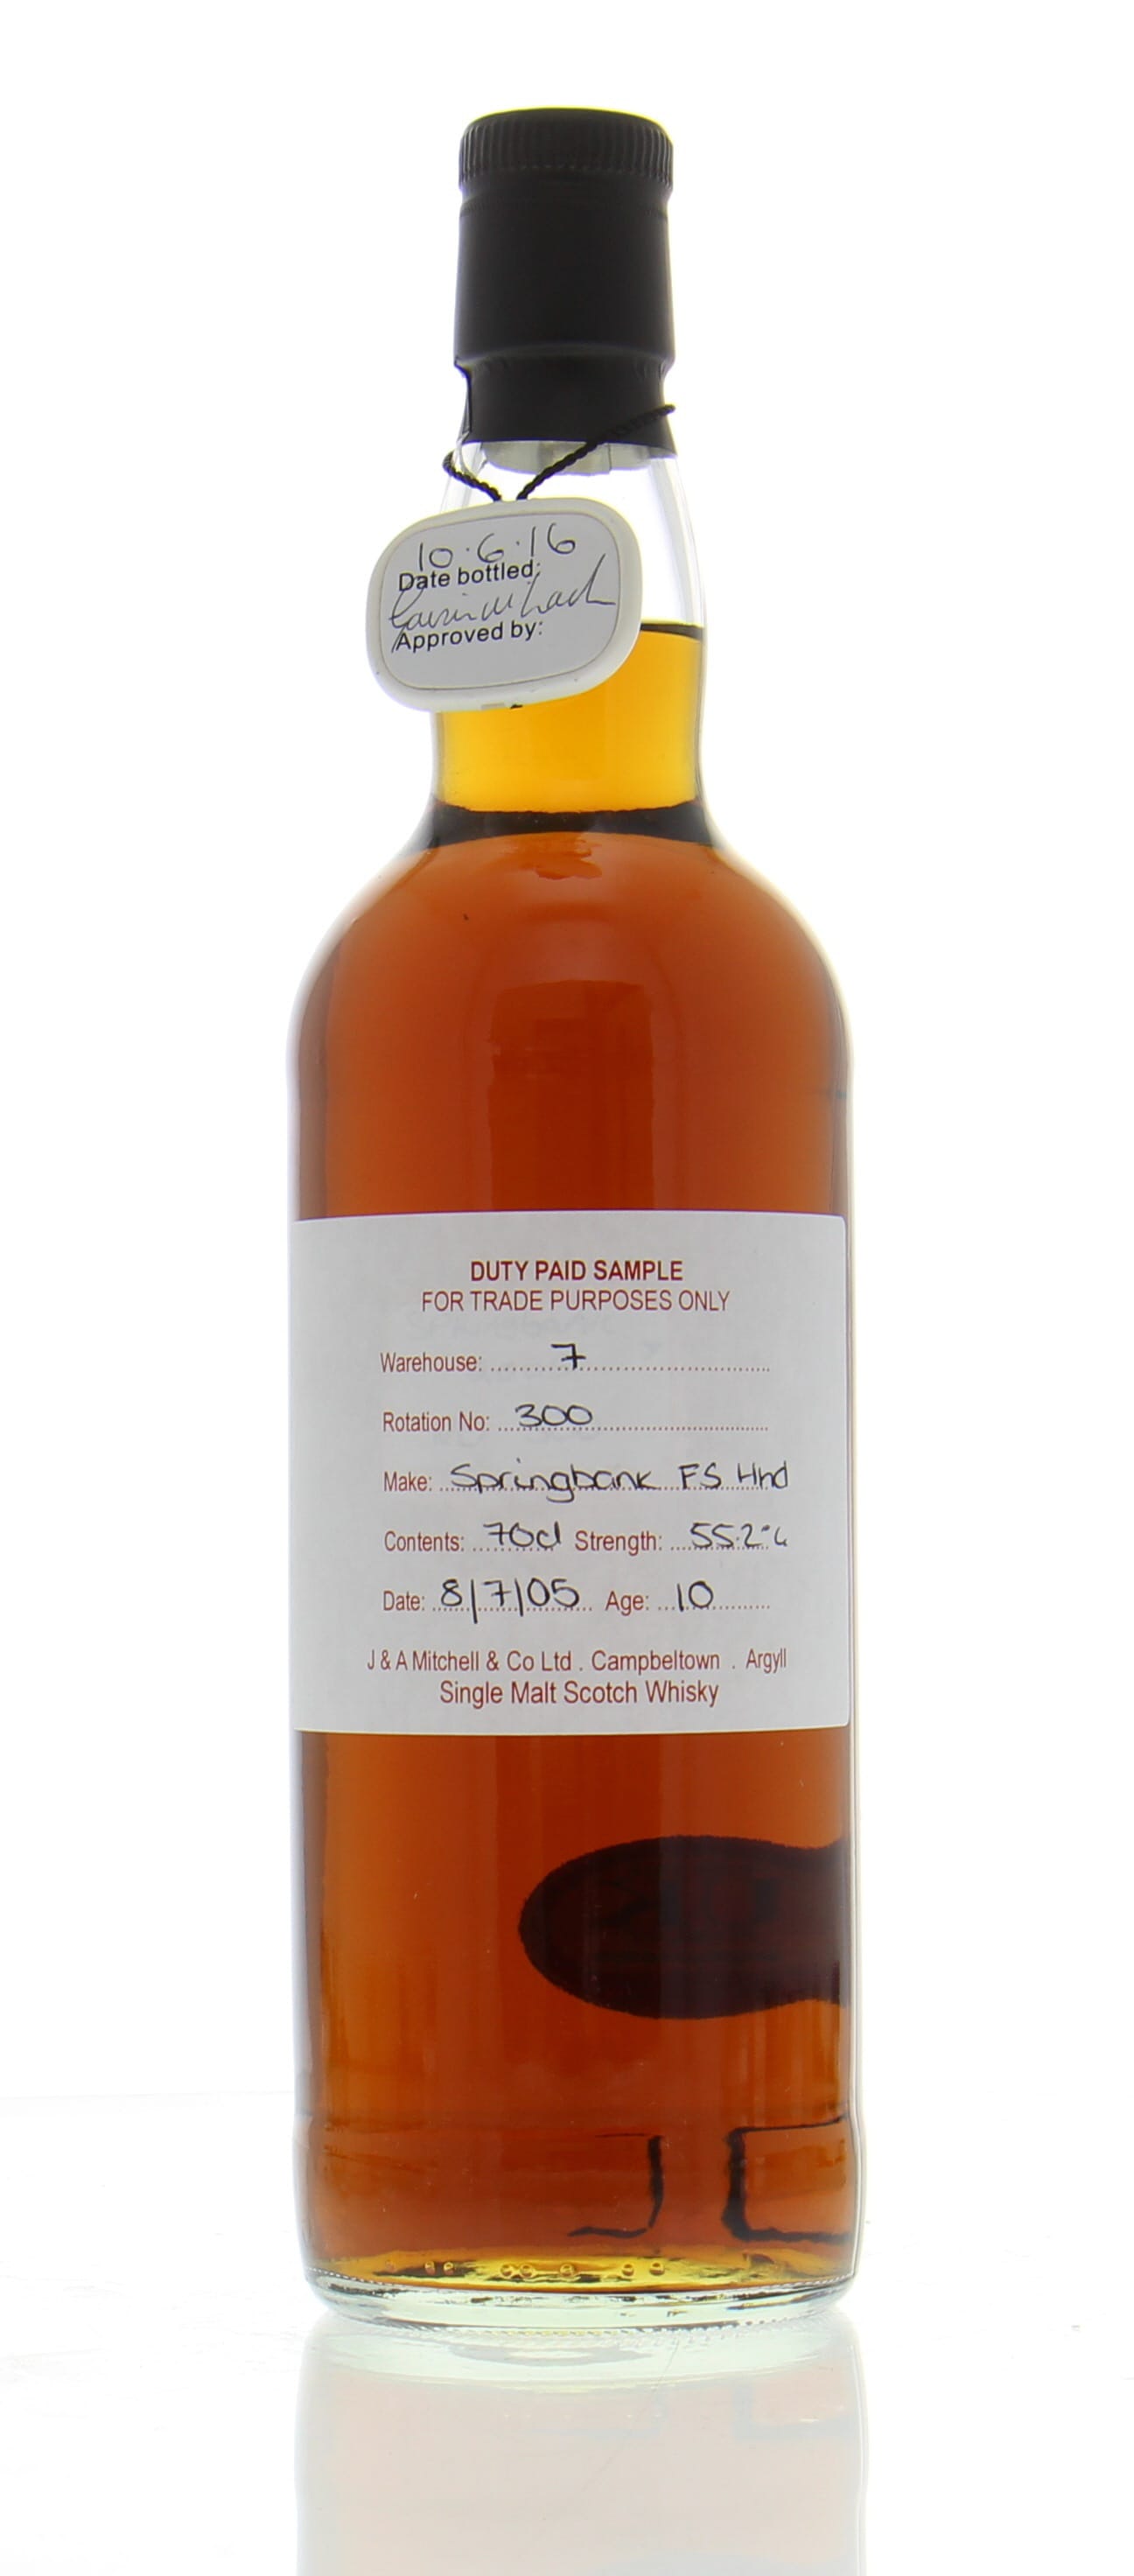 Springbank - 10 Years Old Duty Paid Sample Warehouse 7 Rotation 300 55.2% 2005 Perfect